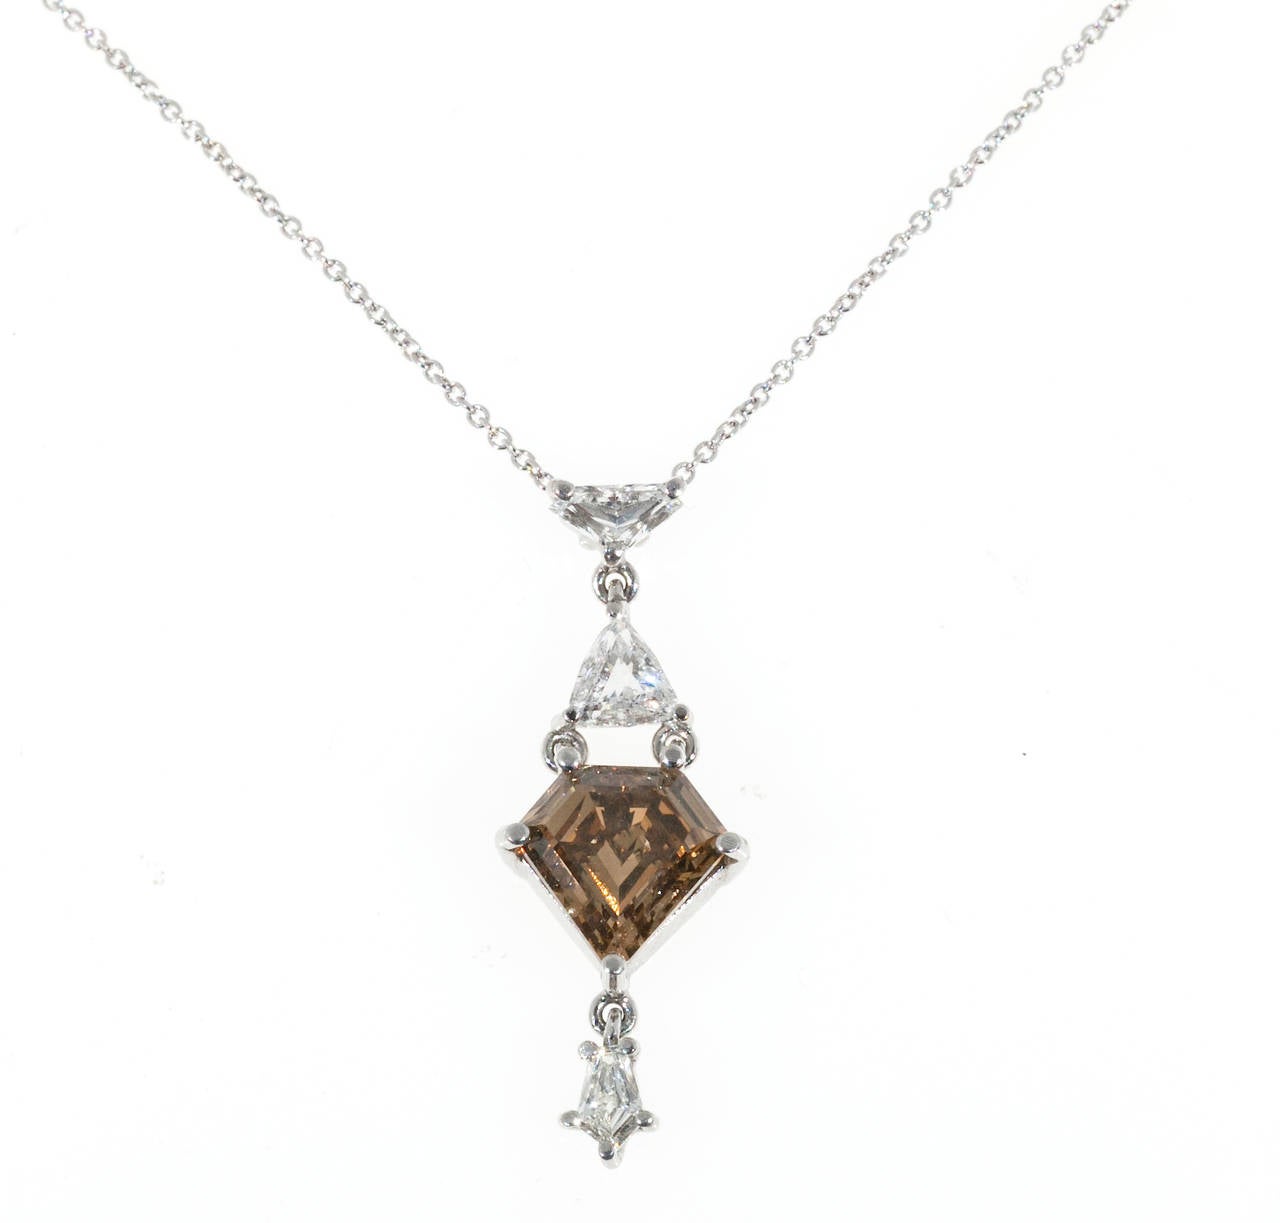 One of a kind handmade pendant with 3 uniquely shaped white diamonds.  Shield shape a natural genuine fancy orangey brown certified 1.63ct   diamond.  Near perfect cutting.  Certified as a modified kite step cut natural fancy orangey brown color